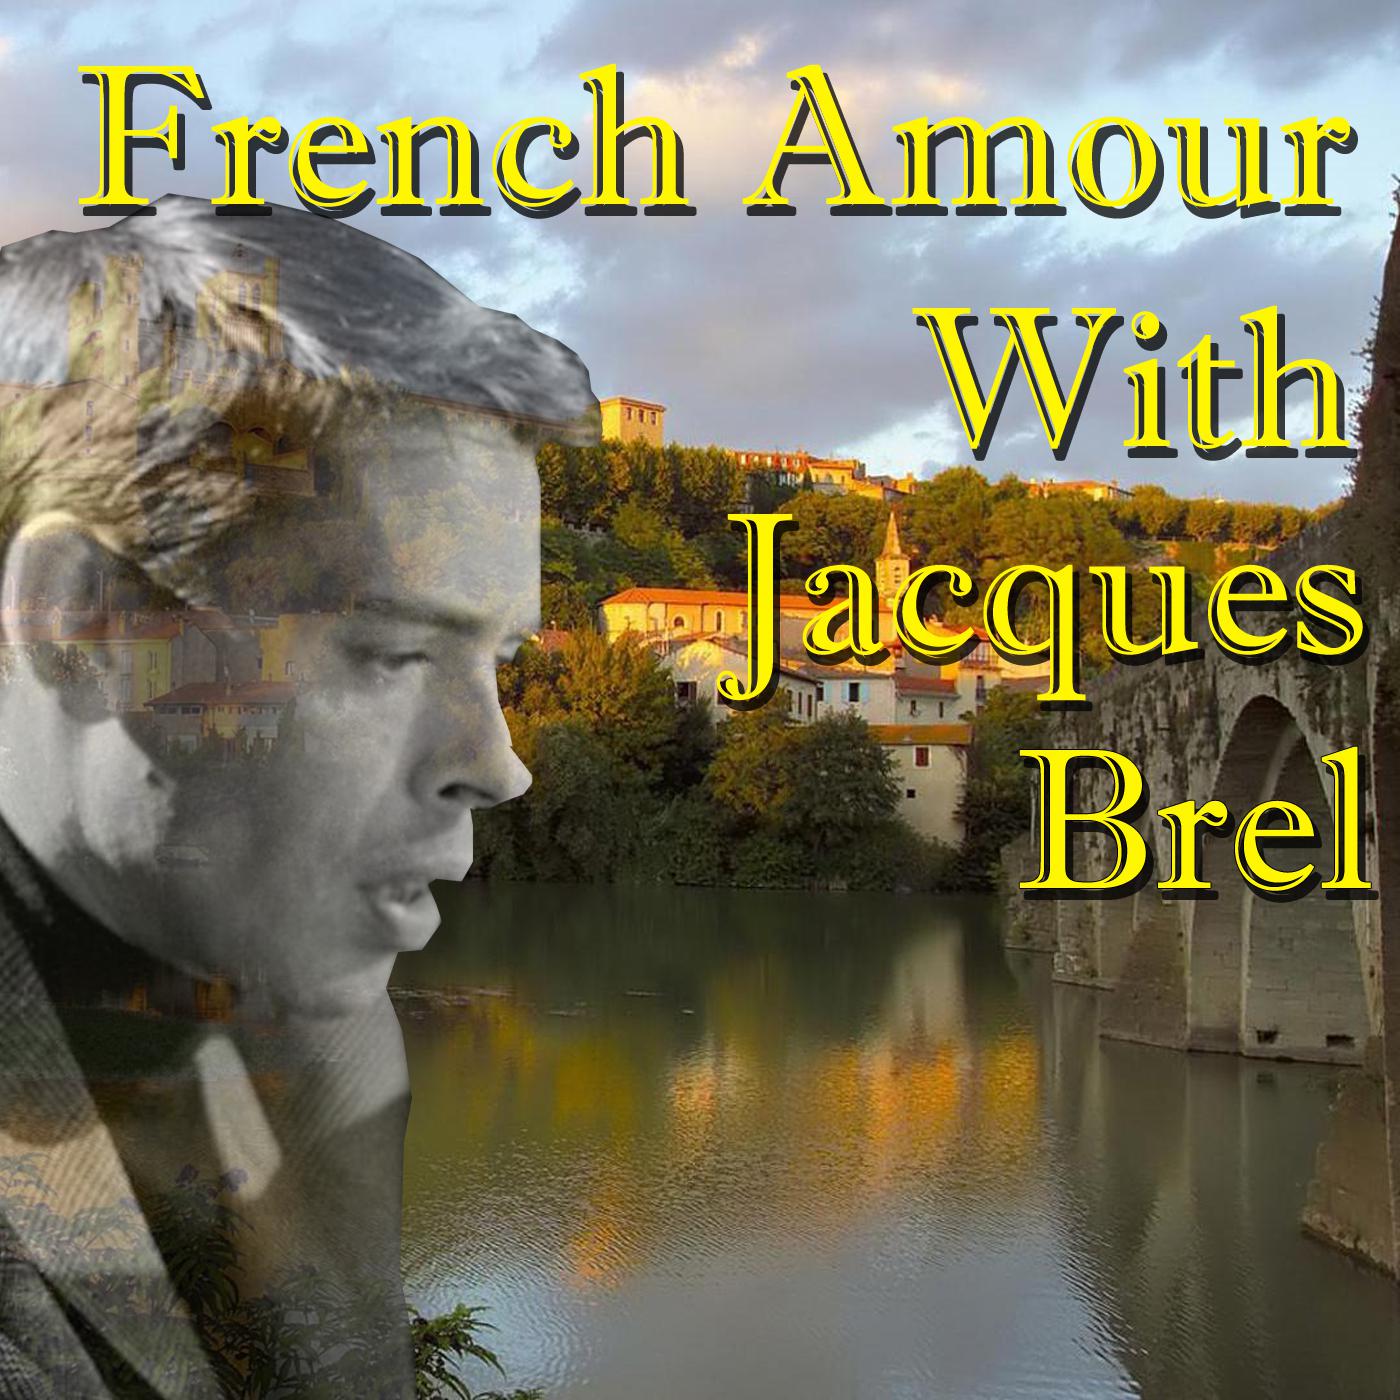 French Amour With Jacques Brel, Vol.1